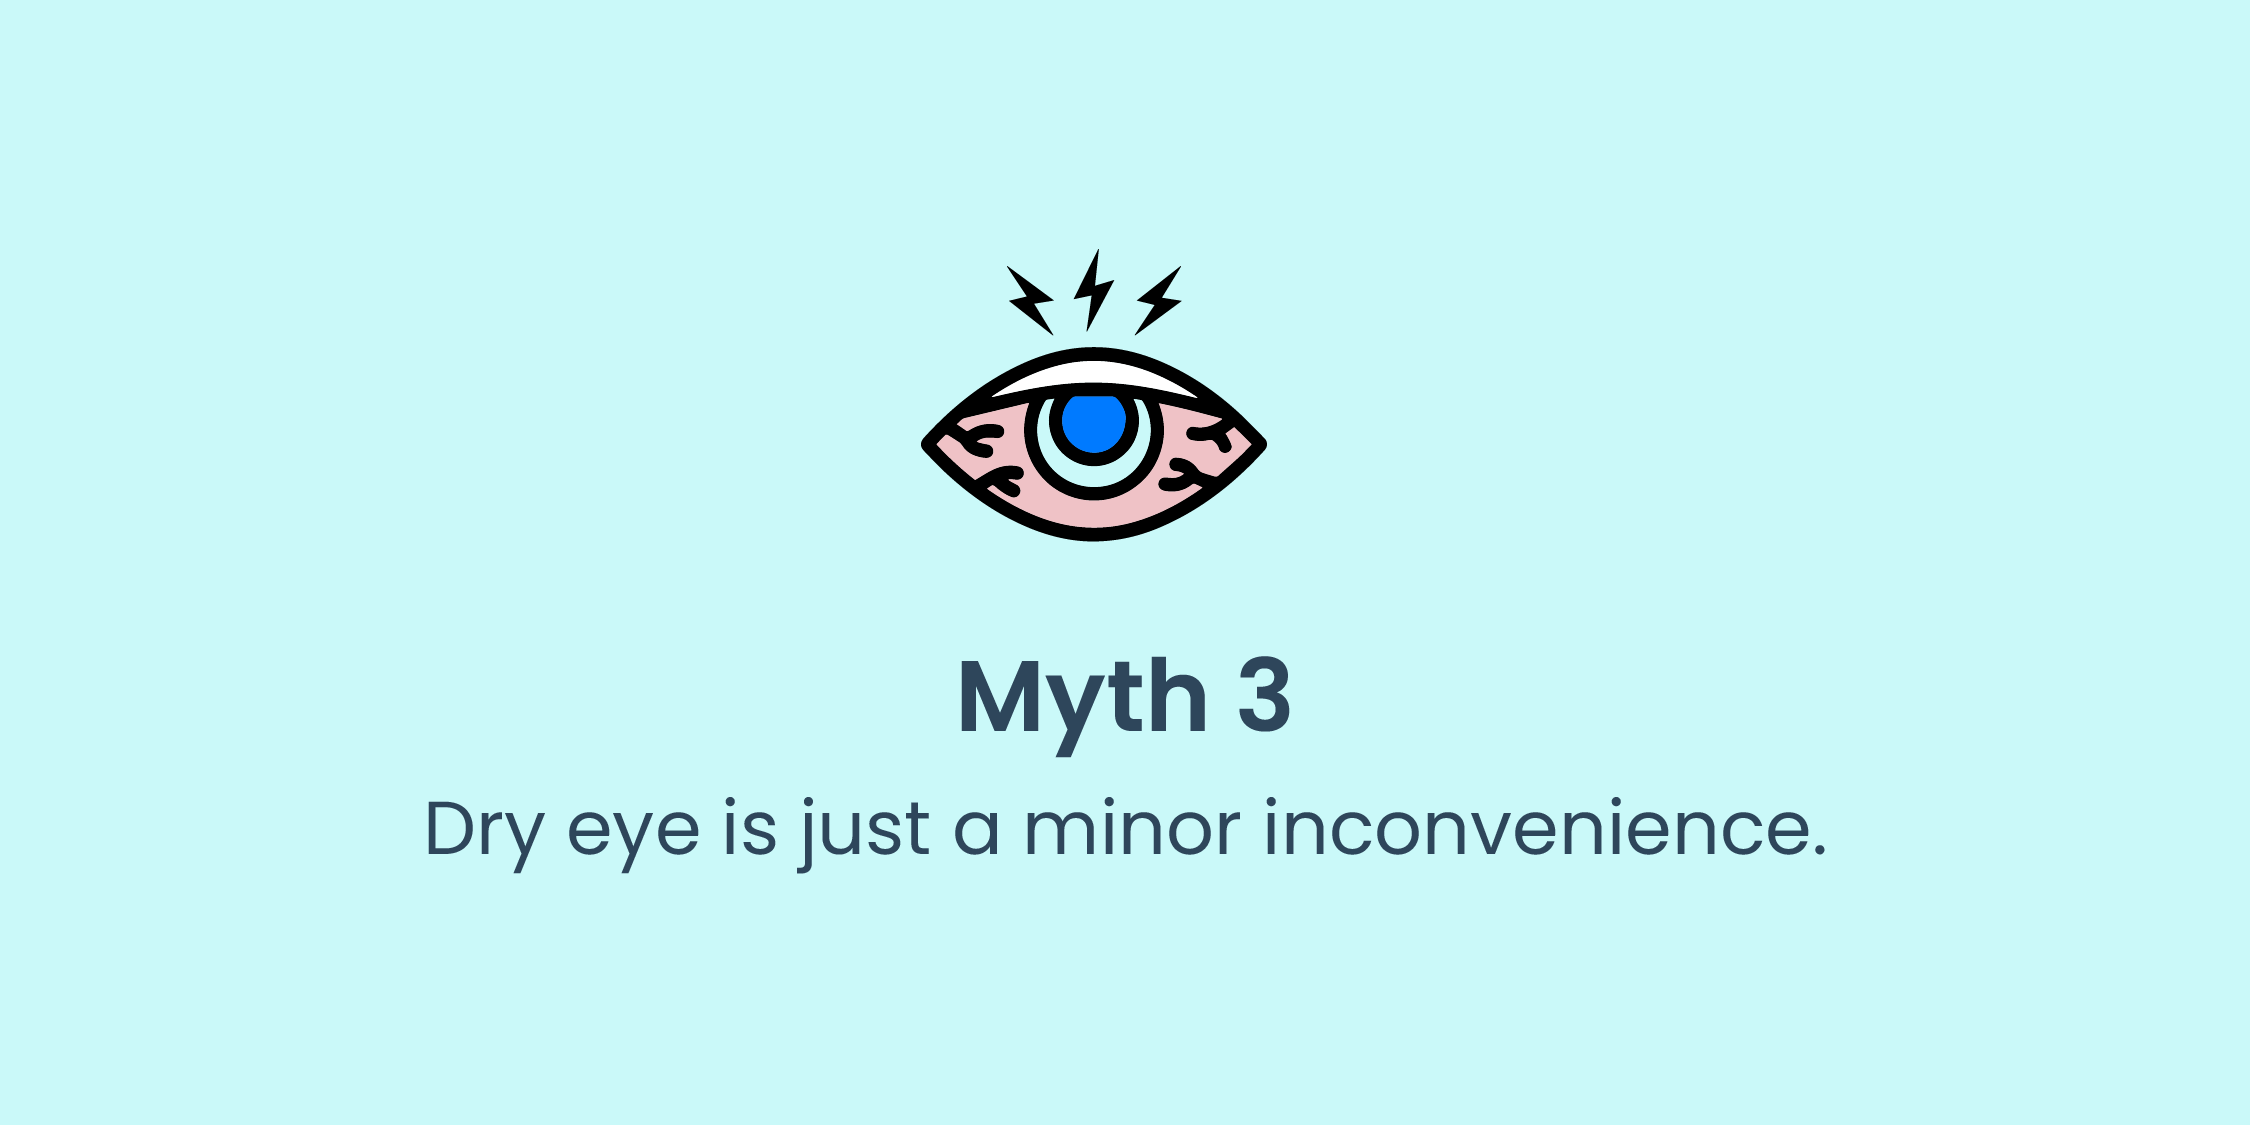 Myth #3: Dry eye is just a minor inconvenience.